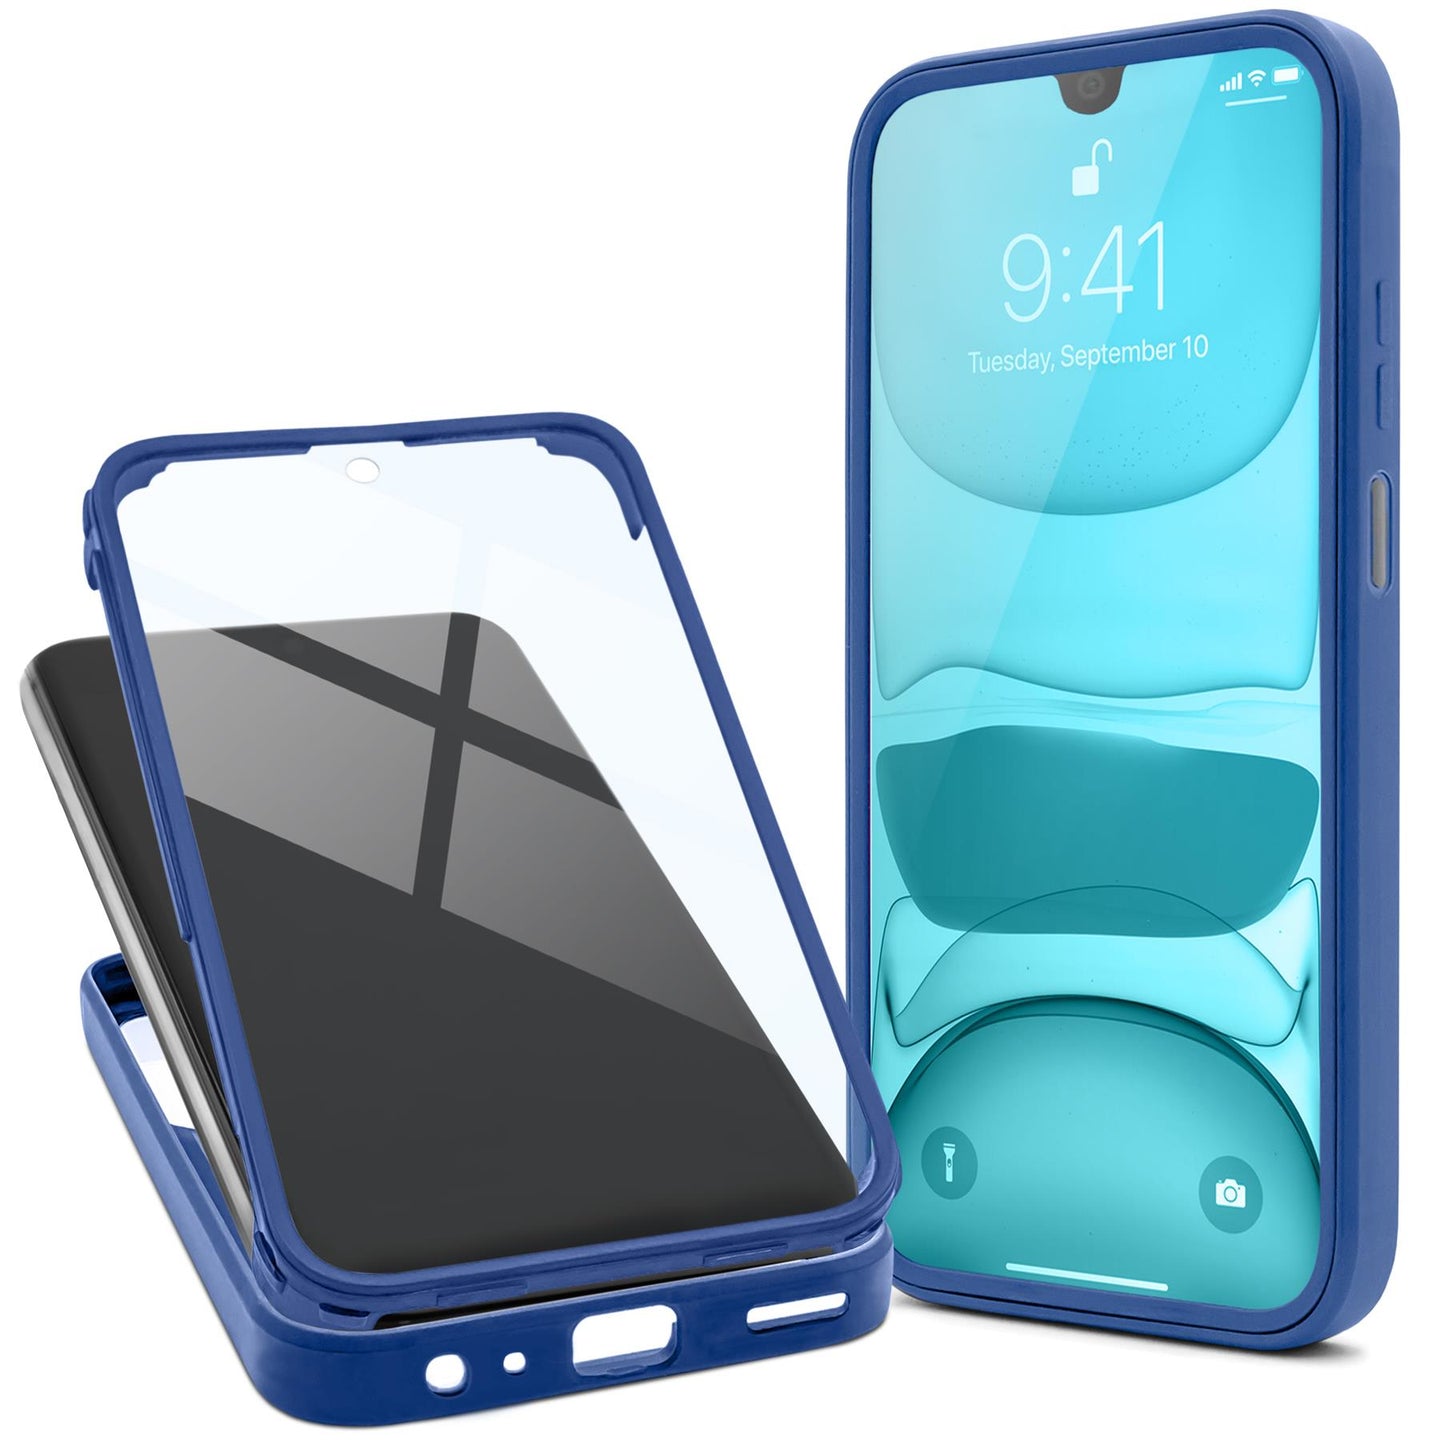 Moozy 360 Case for Samsung A32 5G - Blue Rim Transparent Case, Full Body Double-sided Protection, Cover with Built-in Screen Protector